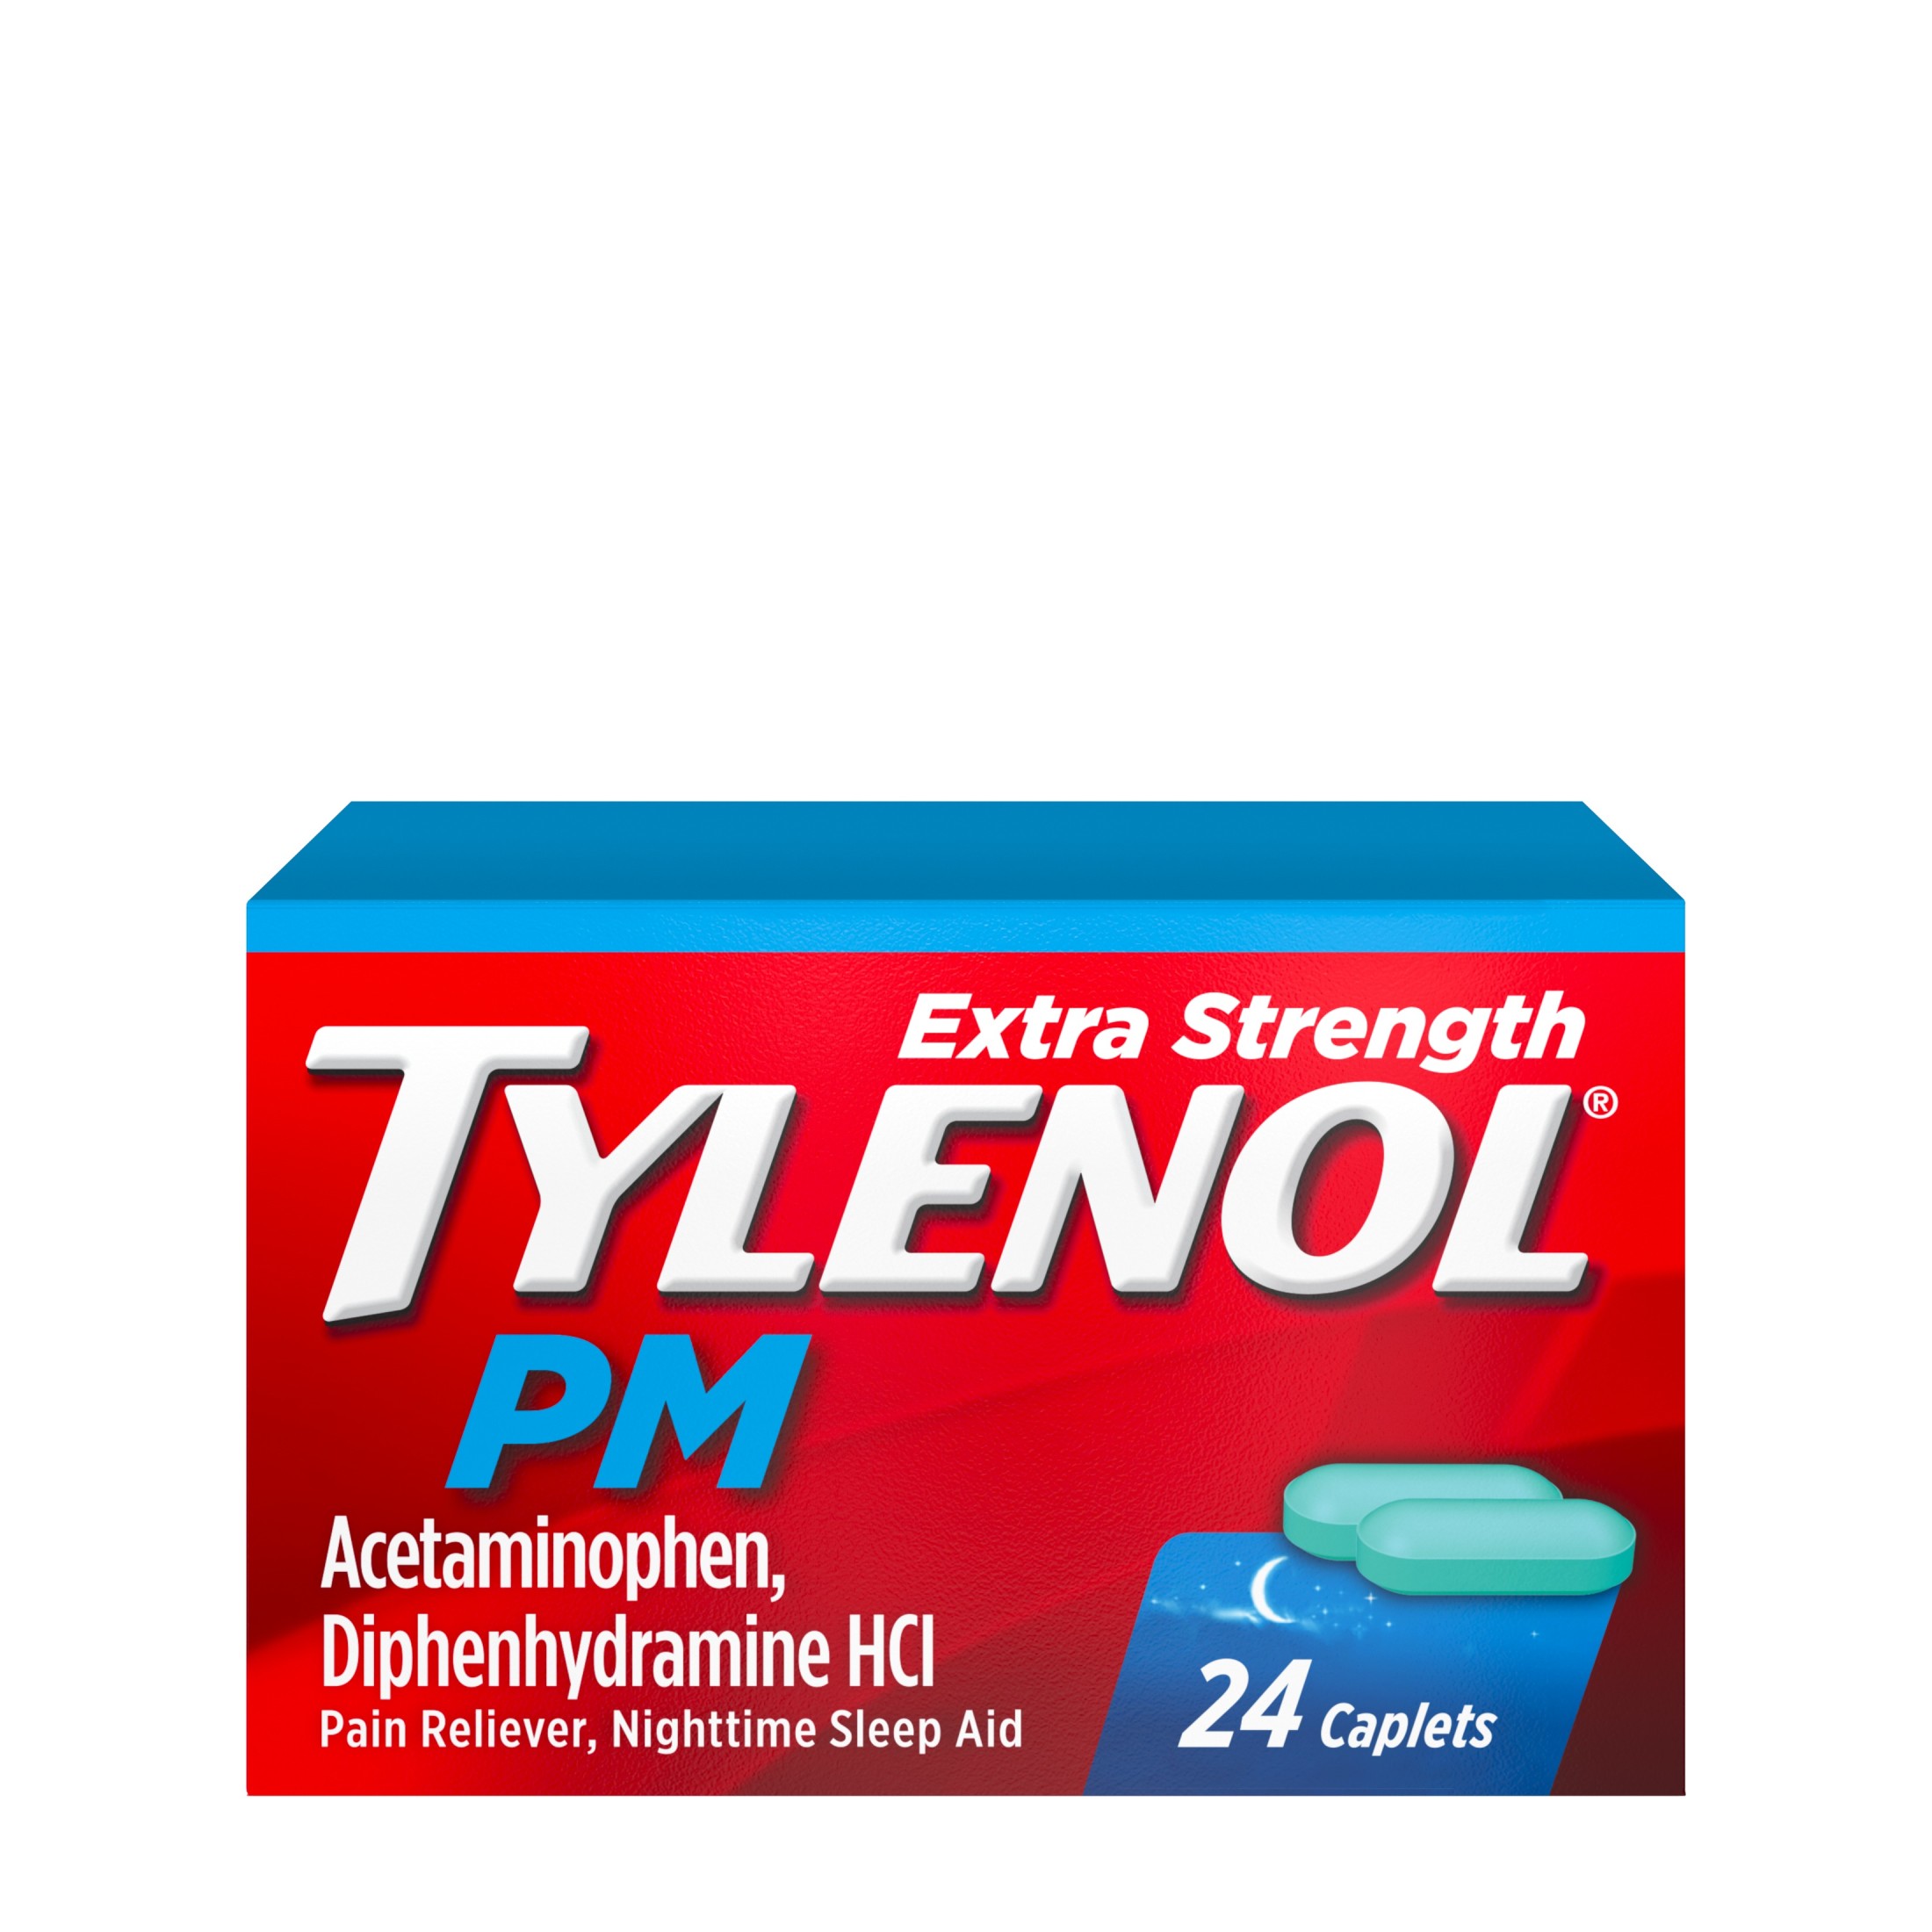 Tylenol PM Extra Strength Pain Reliever & Sleep Aid Caplets, 24 Ct - image 1 of 20